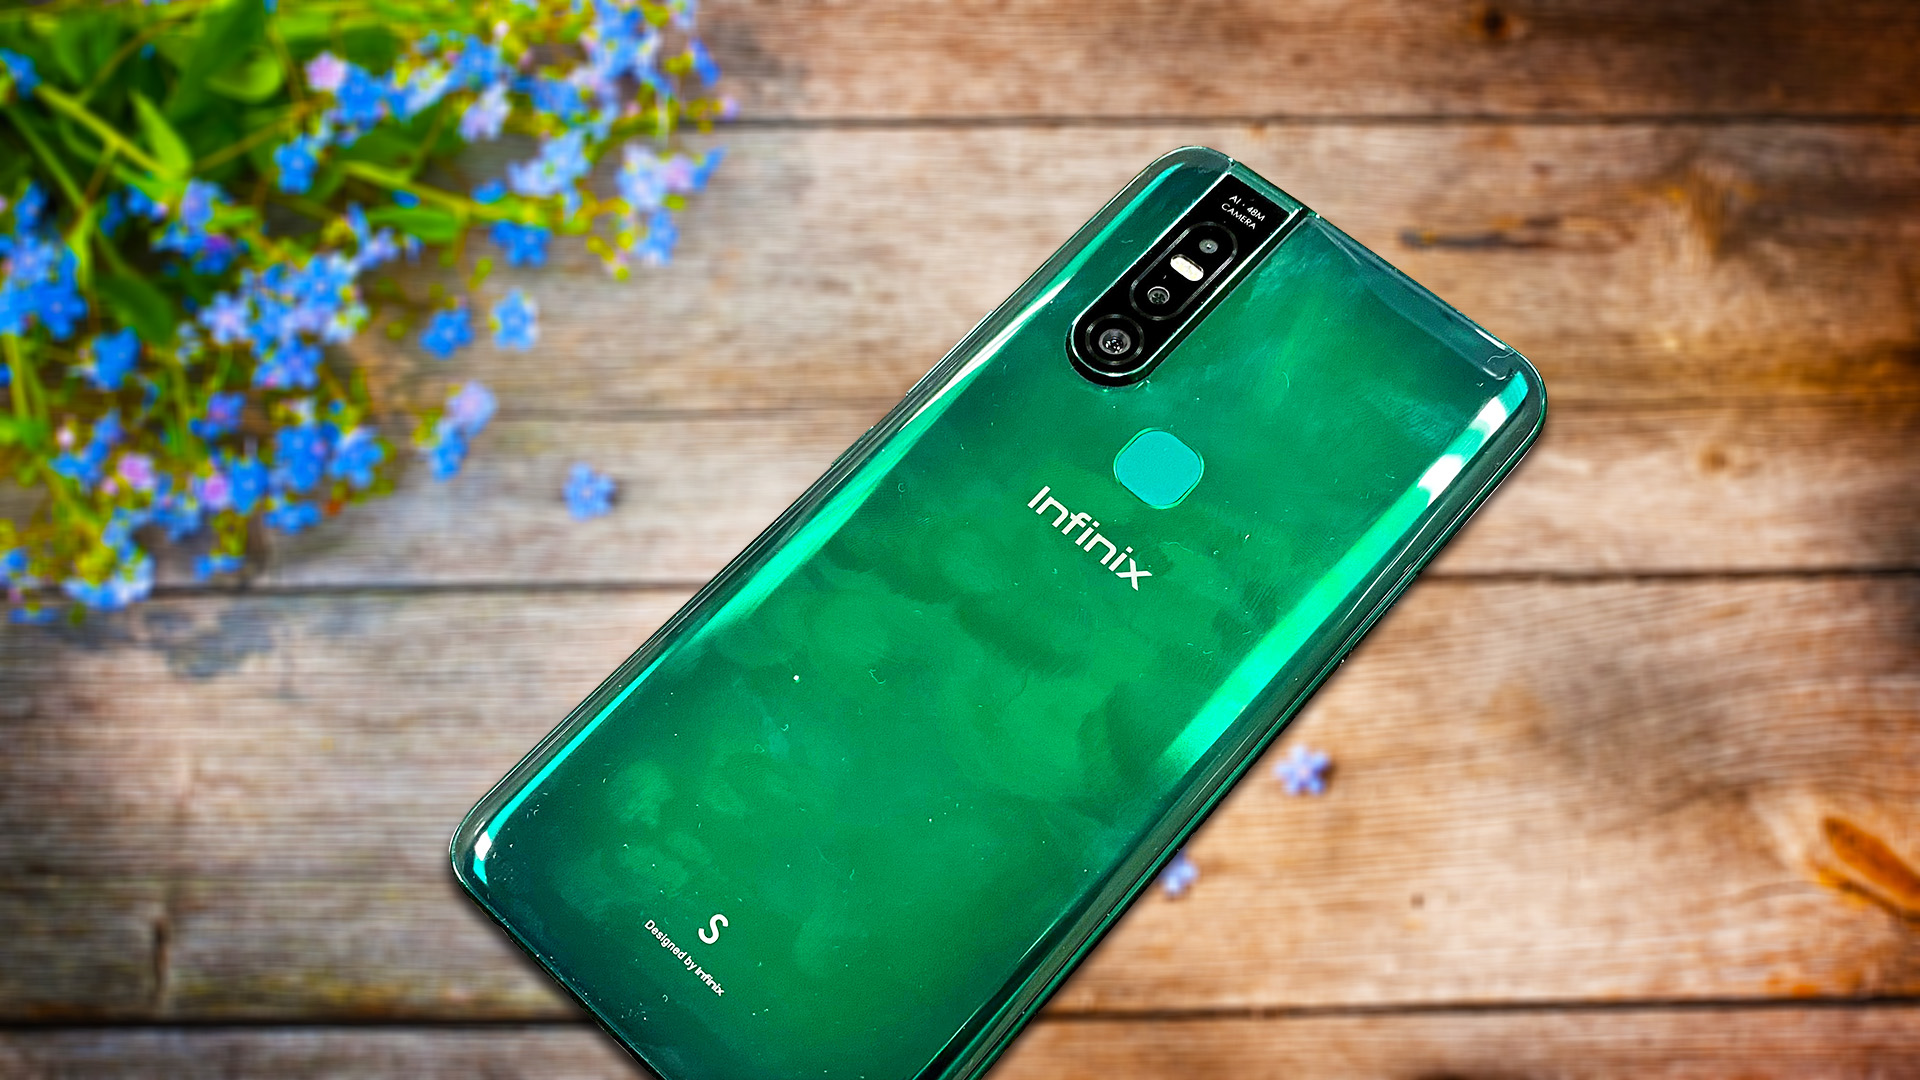 Infinix S5 Pro comes with a Pop-up Camera